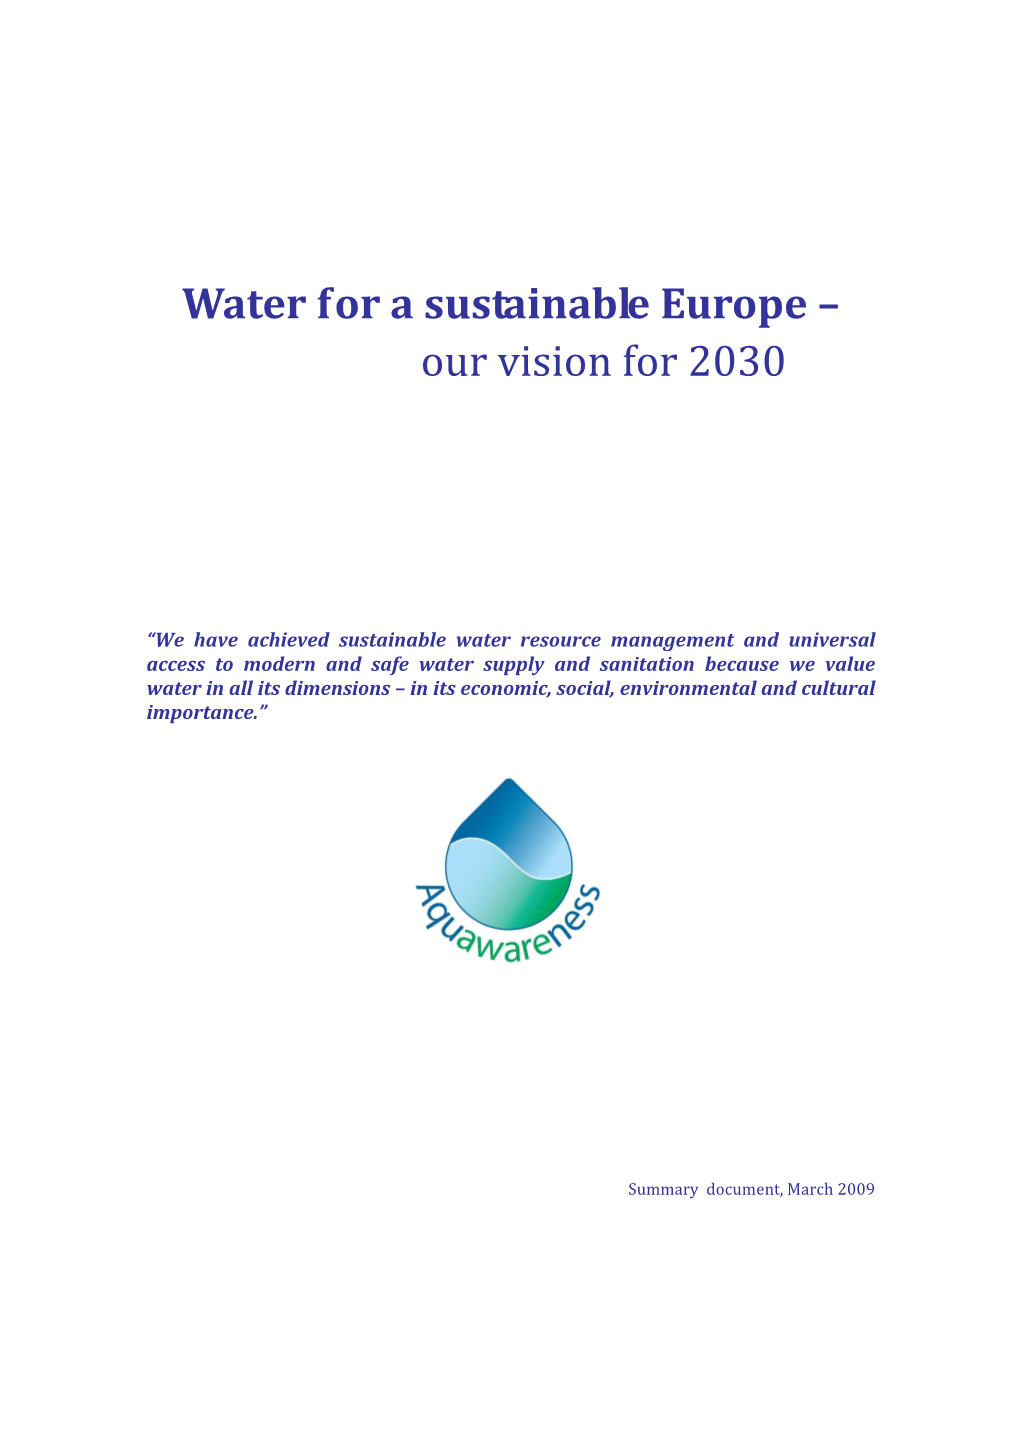 Water for a Sustainable Europe – Our Vision for 2030